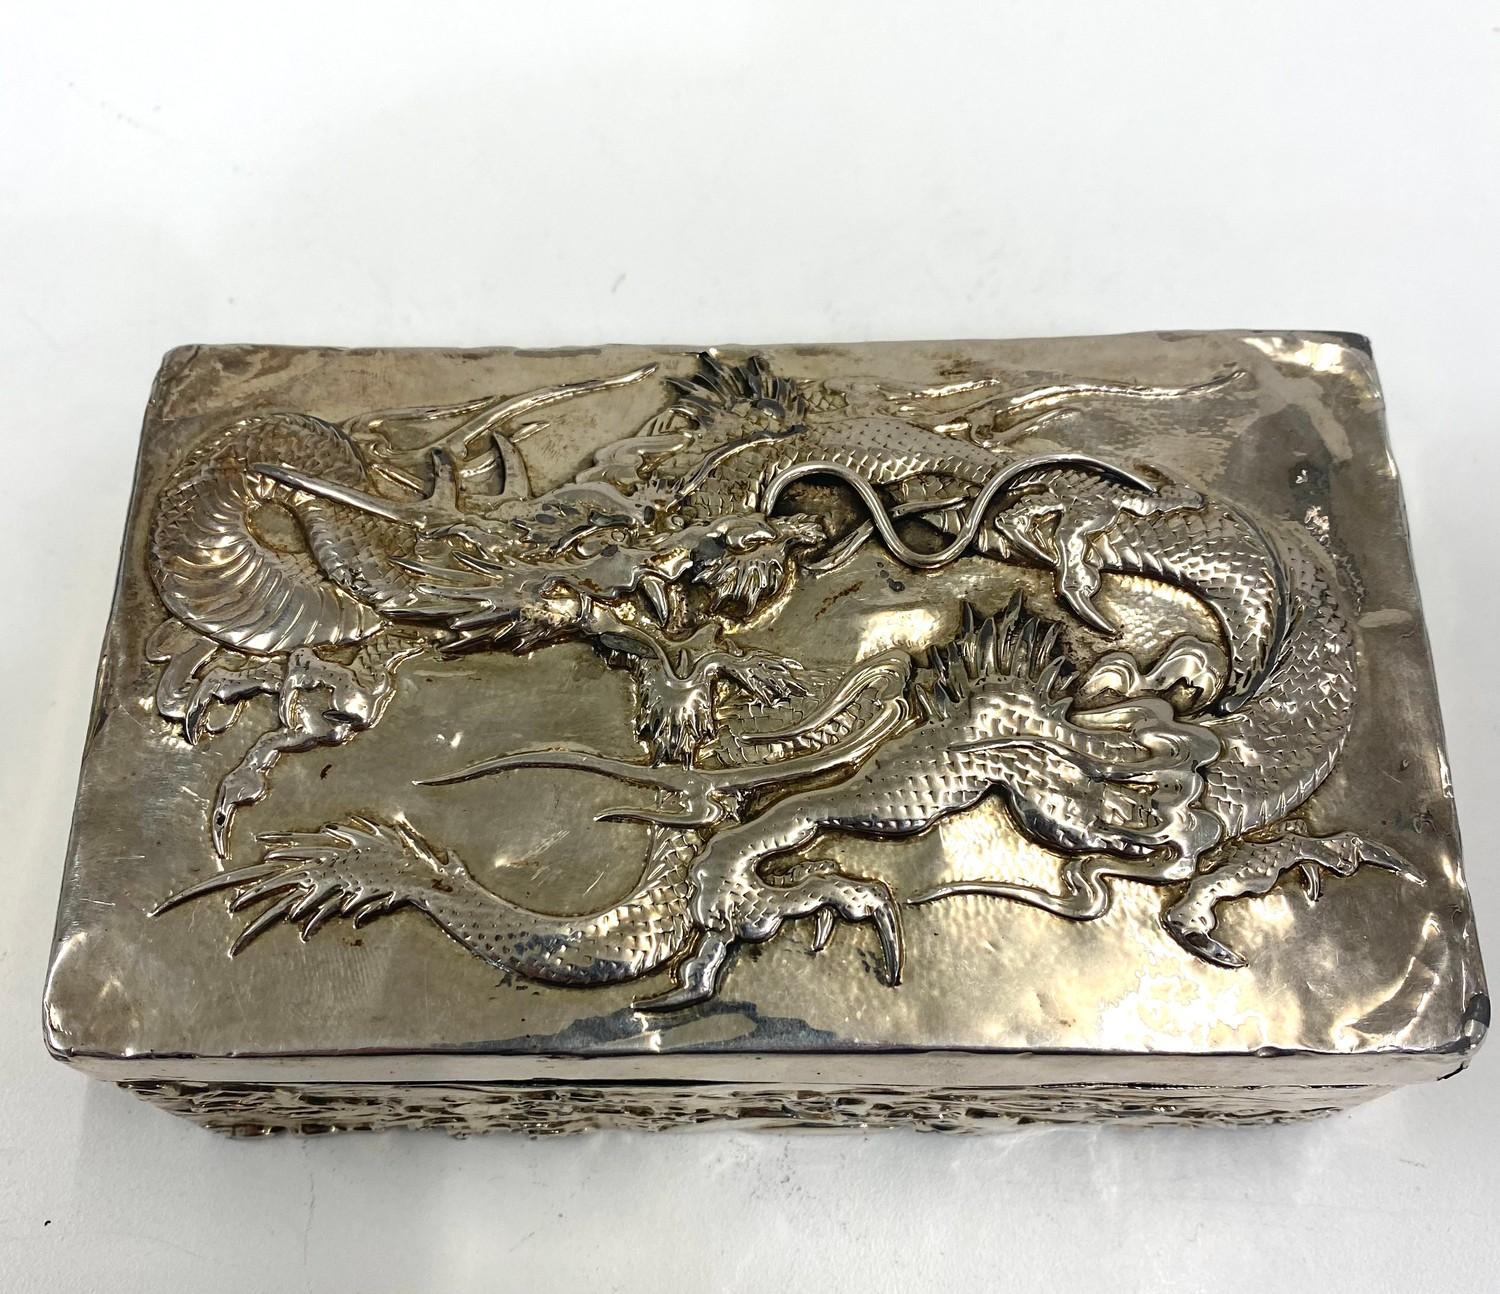 Silver and wooden cigarette box, Chinese detail, no markings but tested as silver, age related wear, - Image 2 of 5